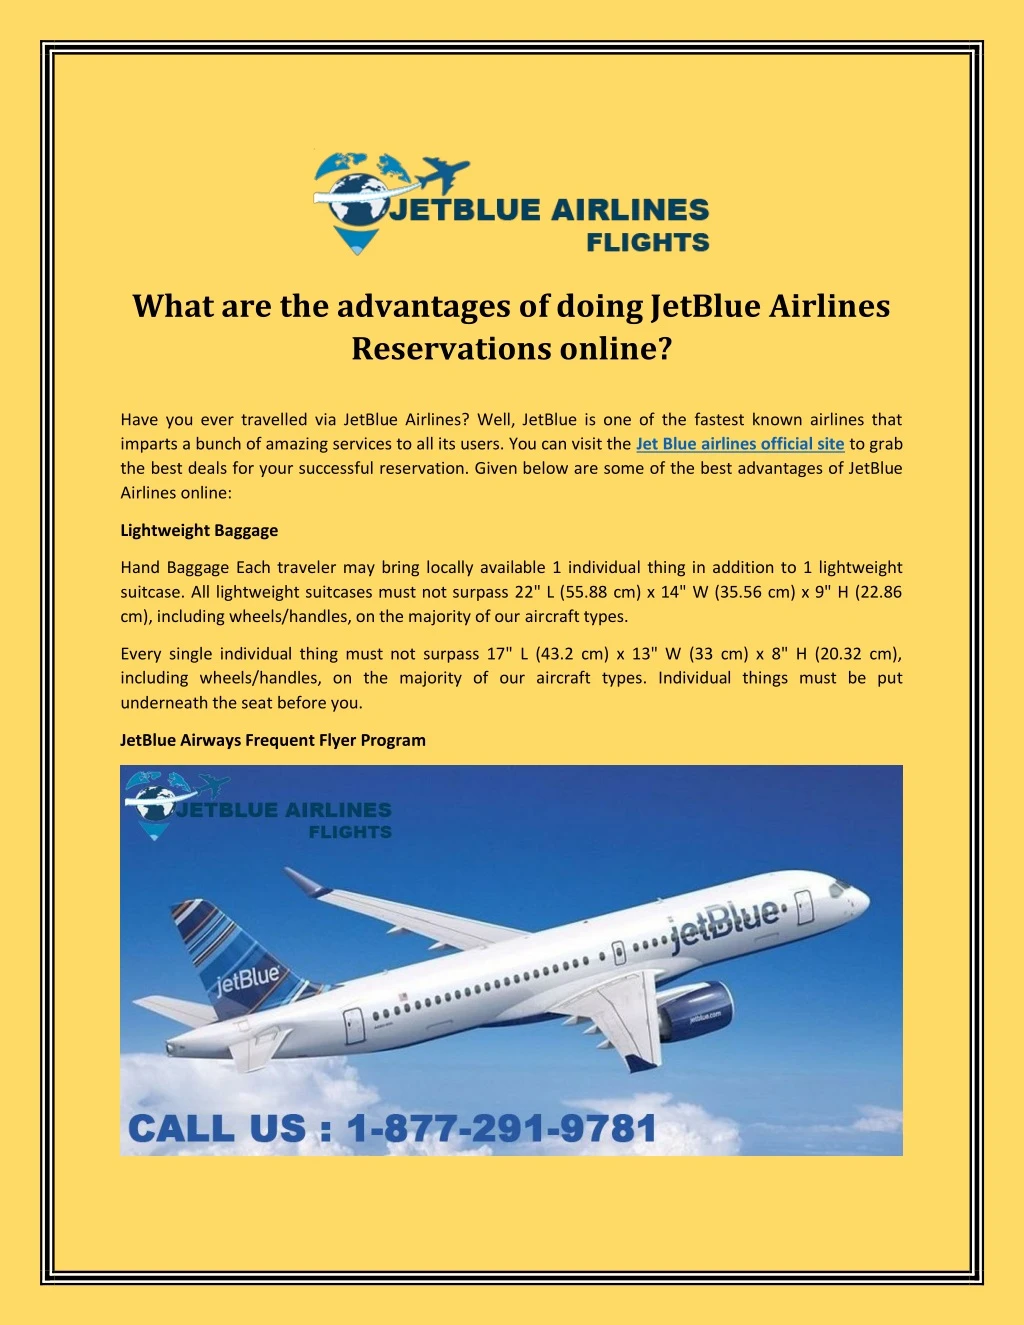 what are the advantages of doing jetblue airlines